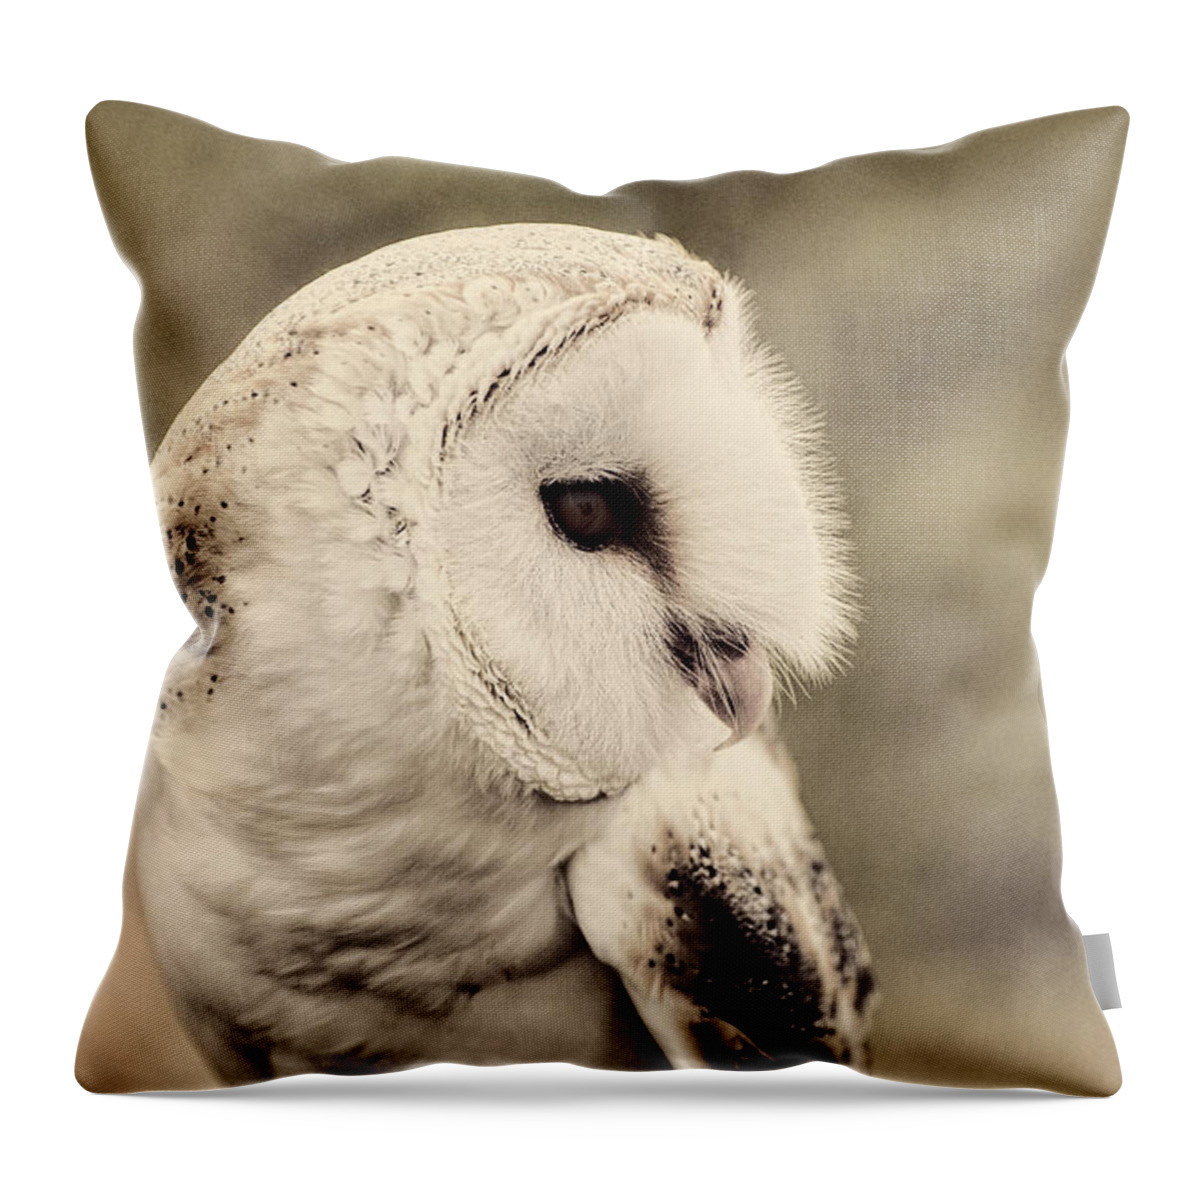 Barn Throw Pillow featuring the photograph Barn Owl by Carolyn Hutchins